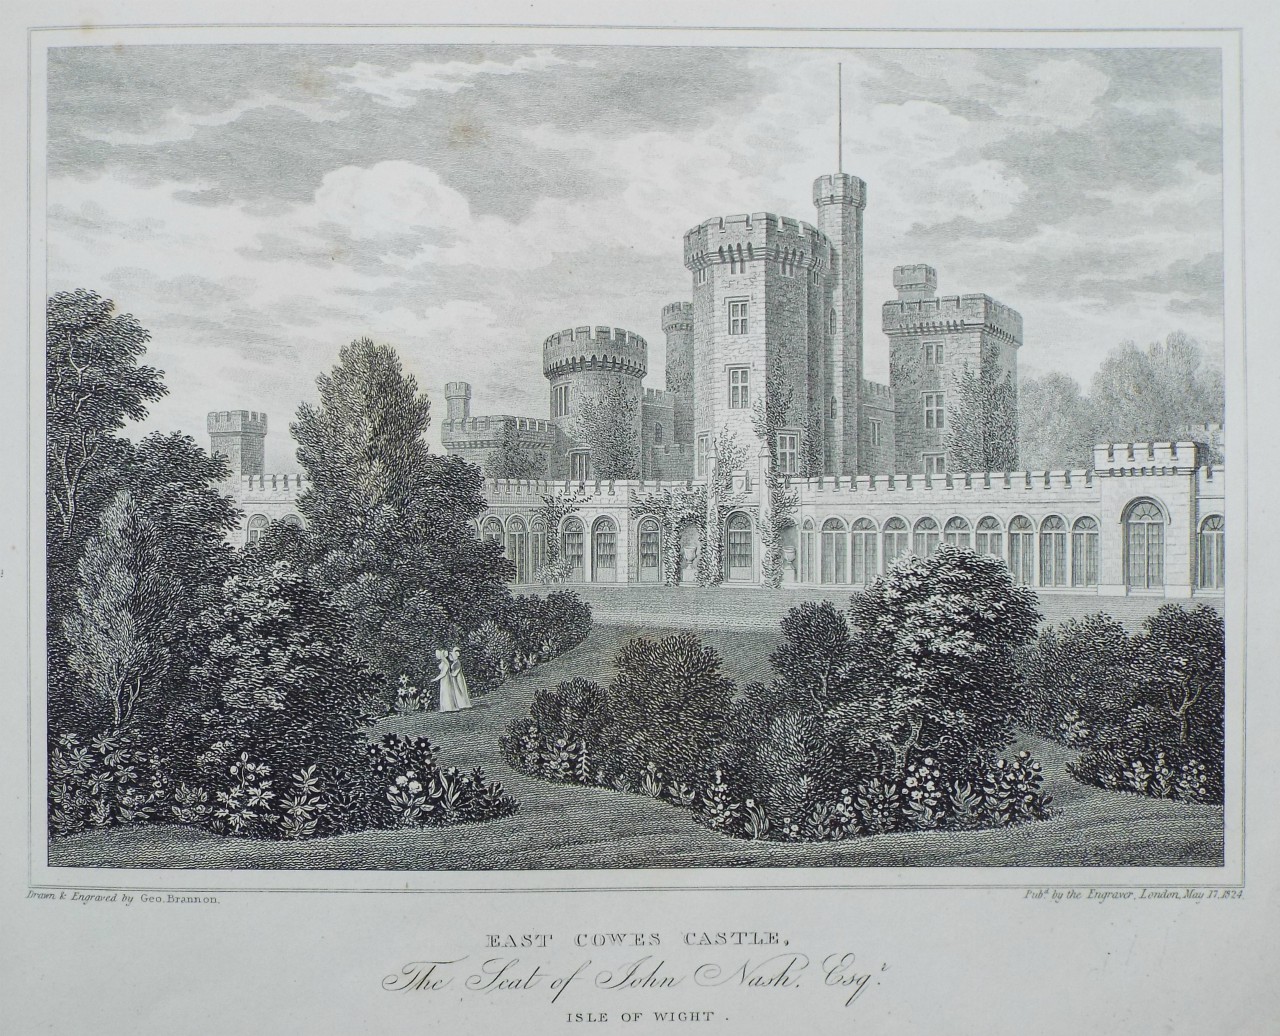 Print - East Cowes Castle, The Seat of John Nash, Esqr. Isle of Wight. - Brannon